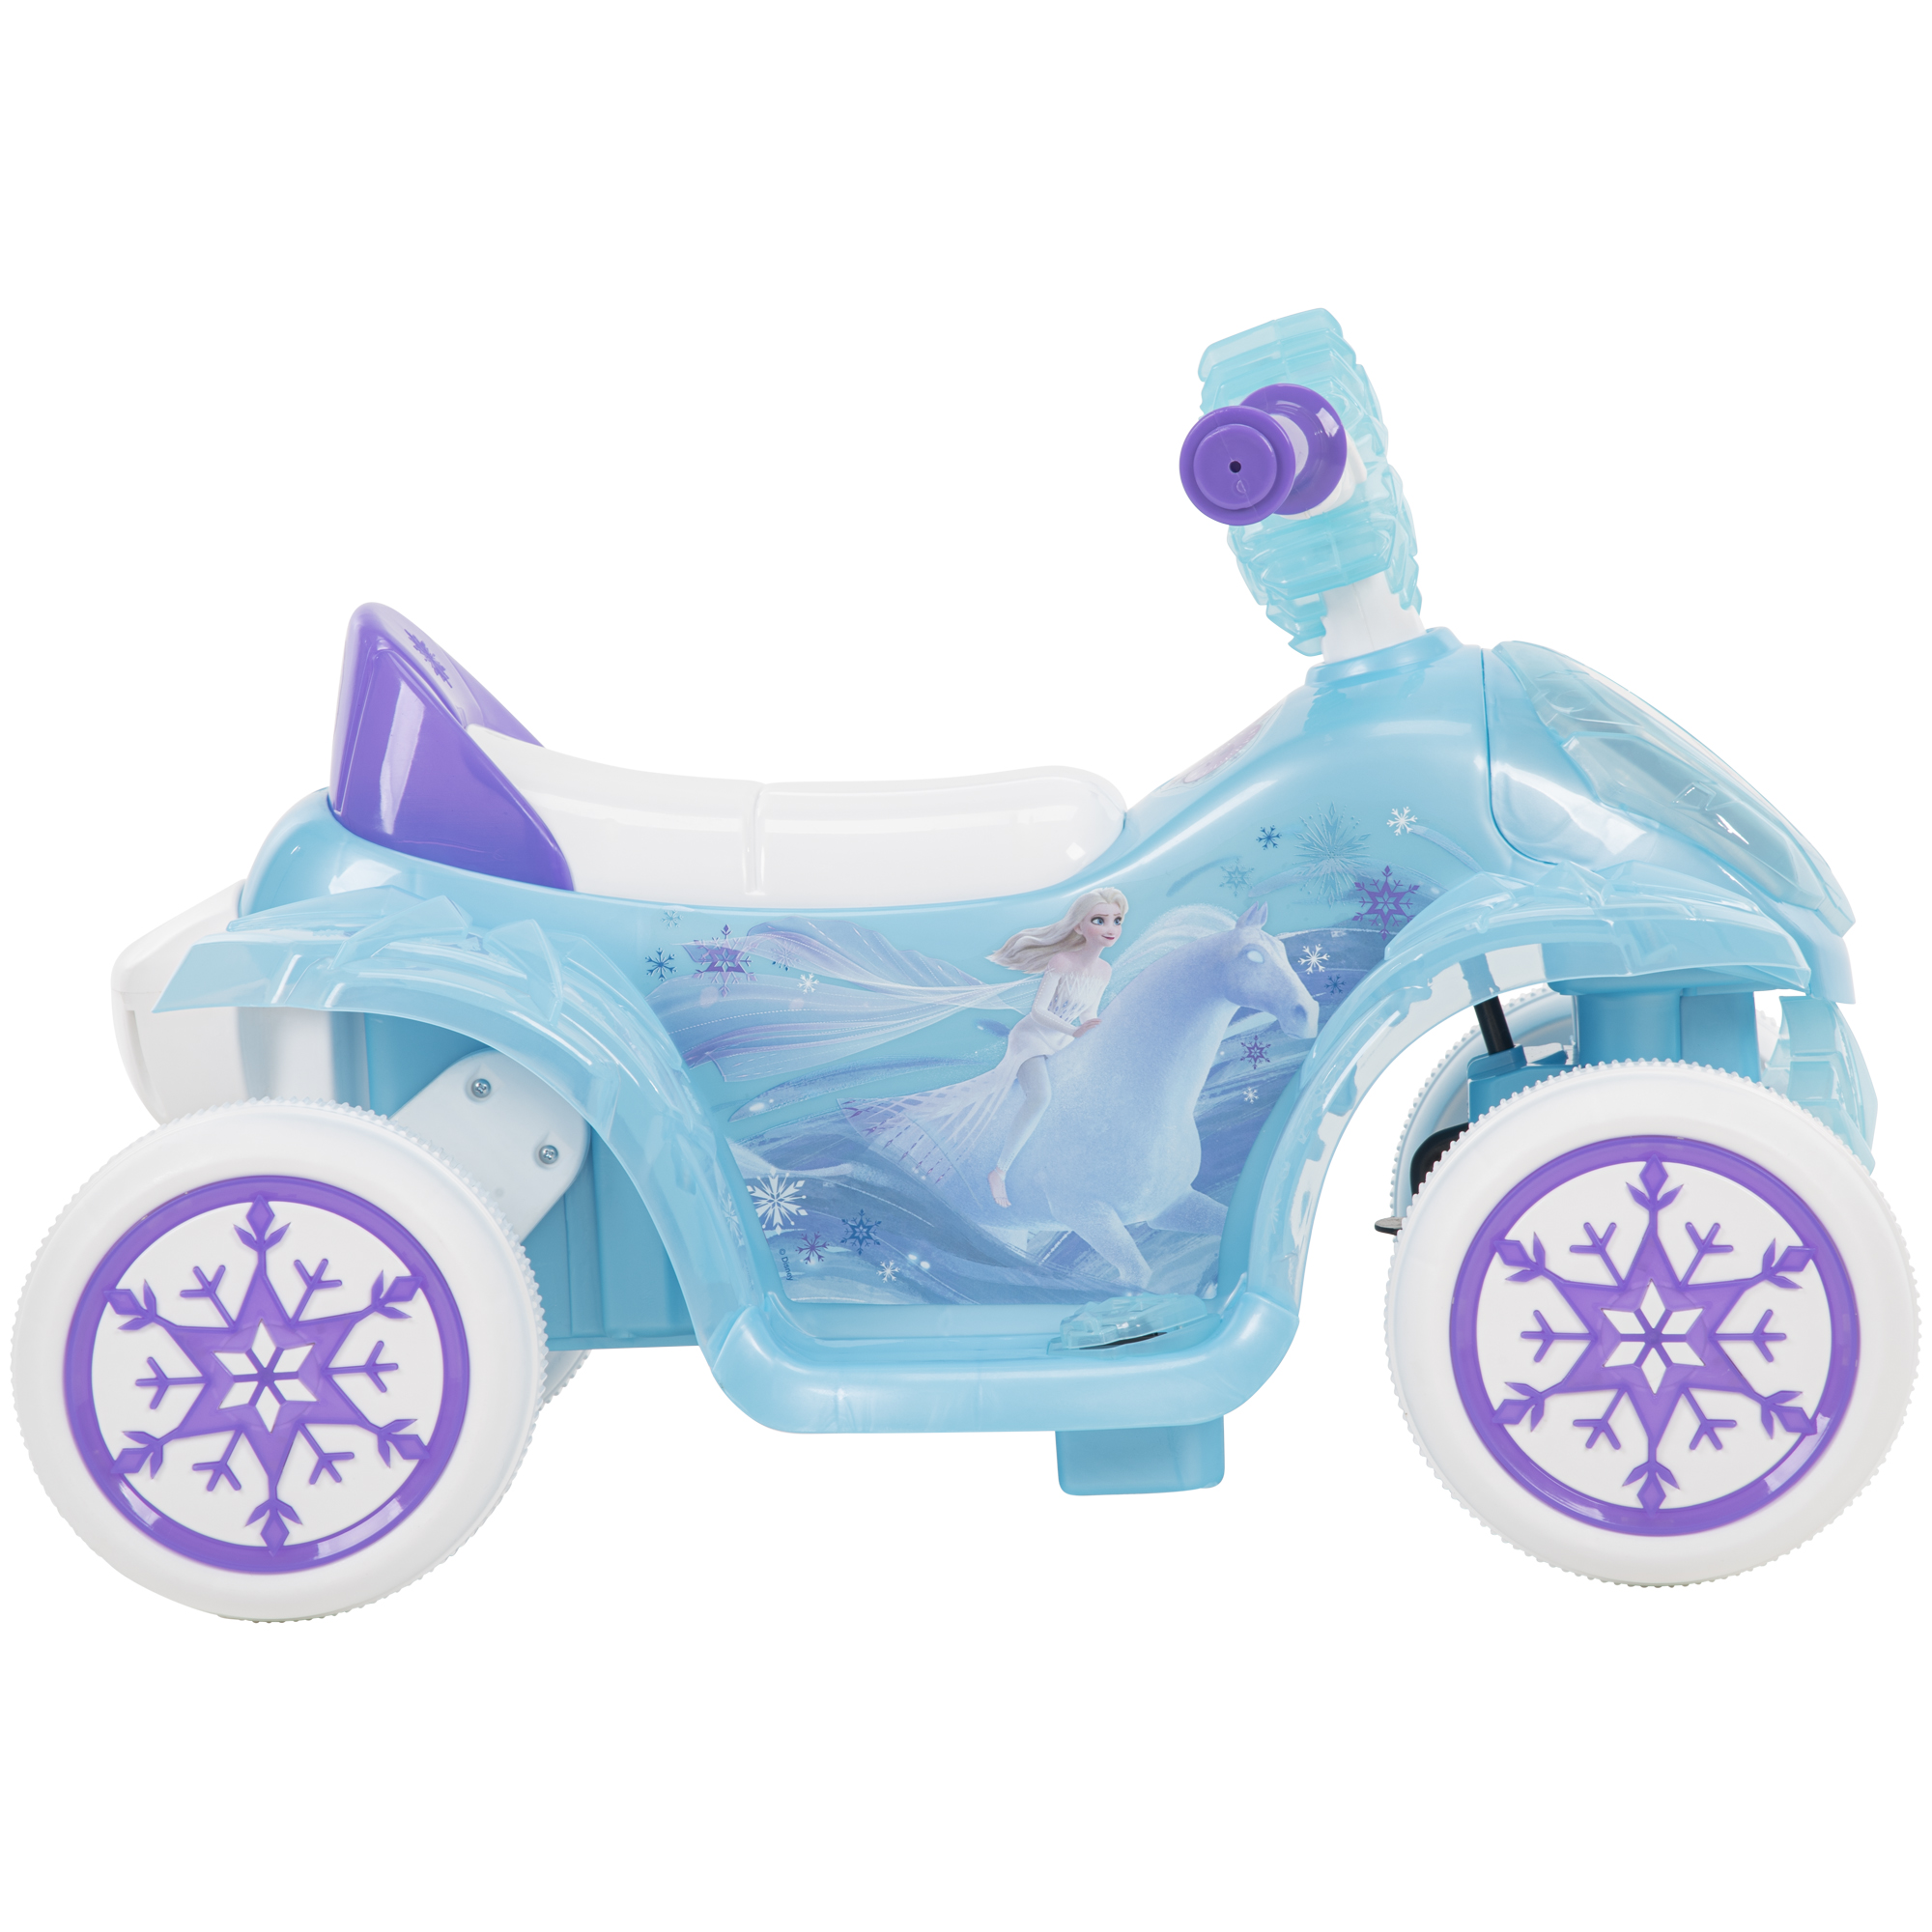 Disney Frozen 6 Volts Electric Ride-on Quad for Girls, Ages 1.5+ Years, by Huffy - image 3 of 15